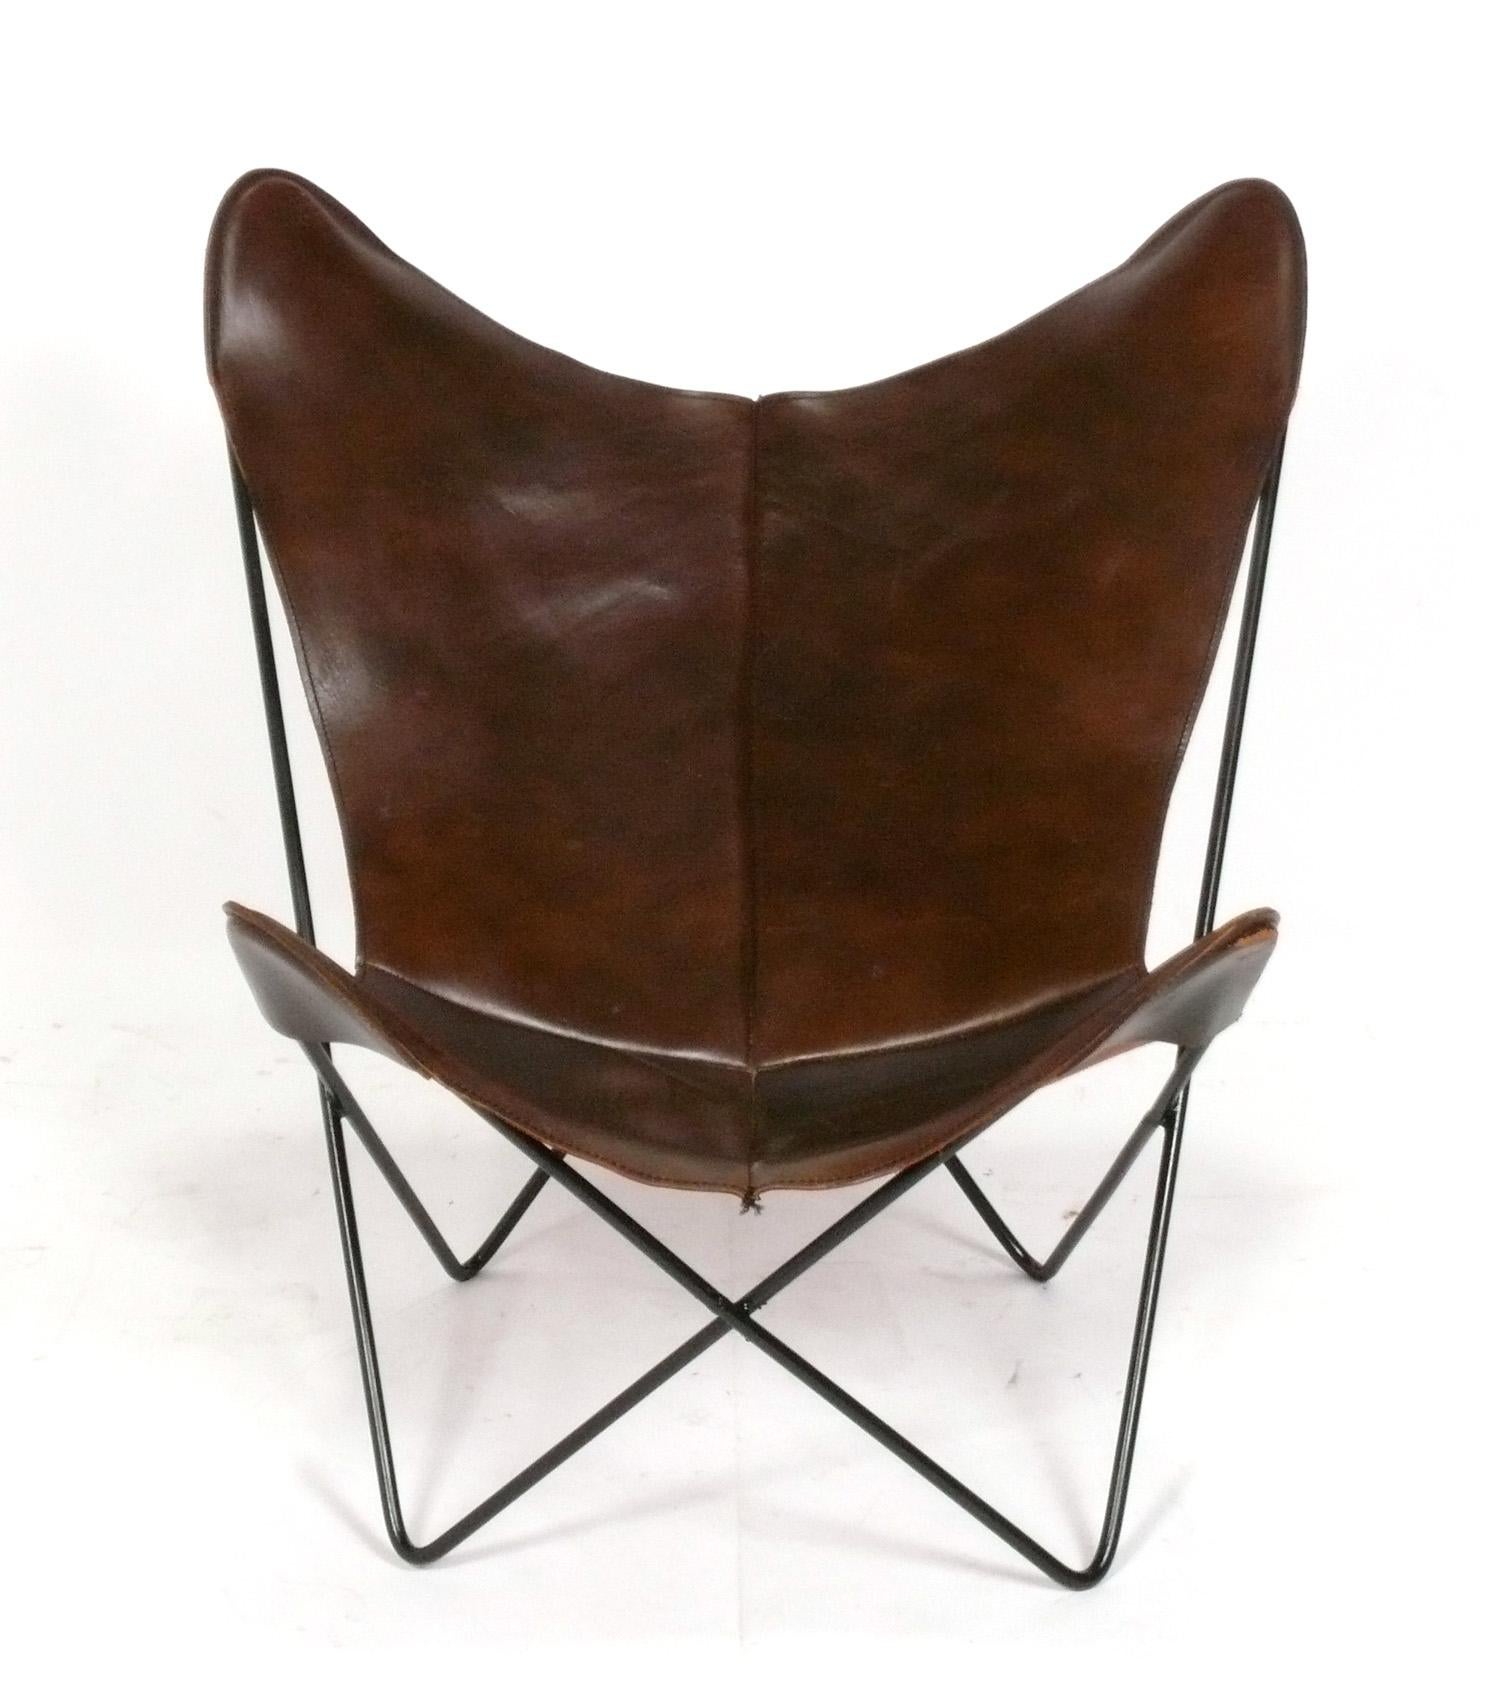 Sculptural Butterfly Chair, designed by Jorge Ferrari-Hardoy for Knoll, American, circa 1960s. This example retains it's dark chocolate brown leather sling and the black iron base has been repainted at some point.